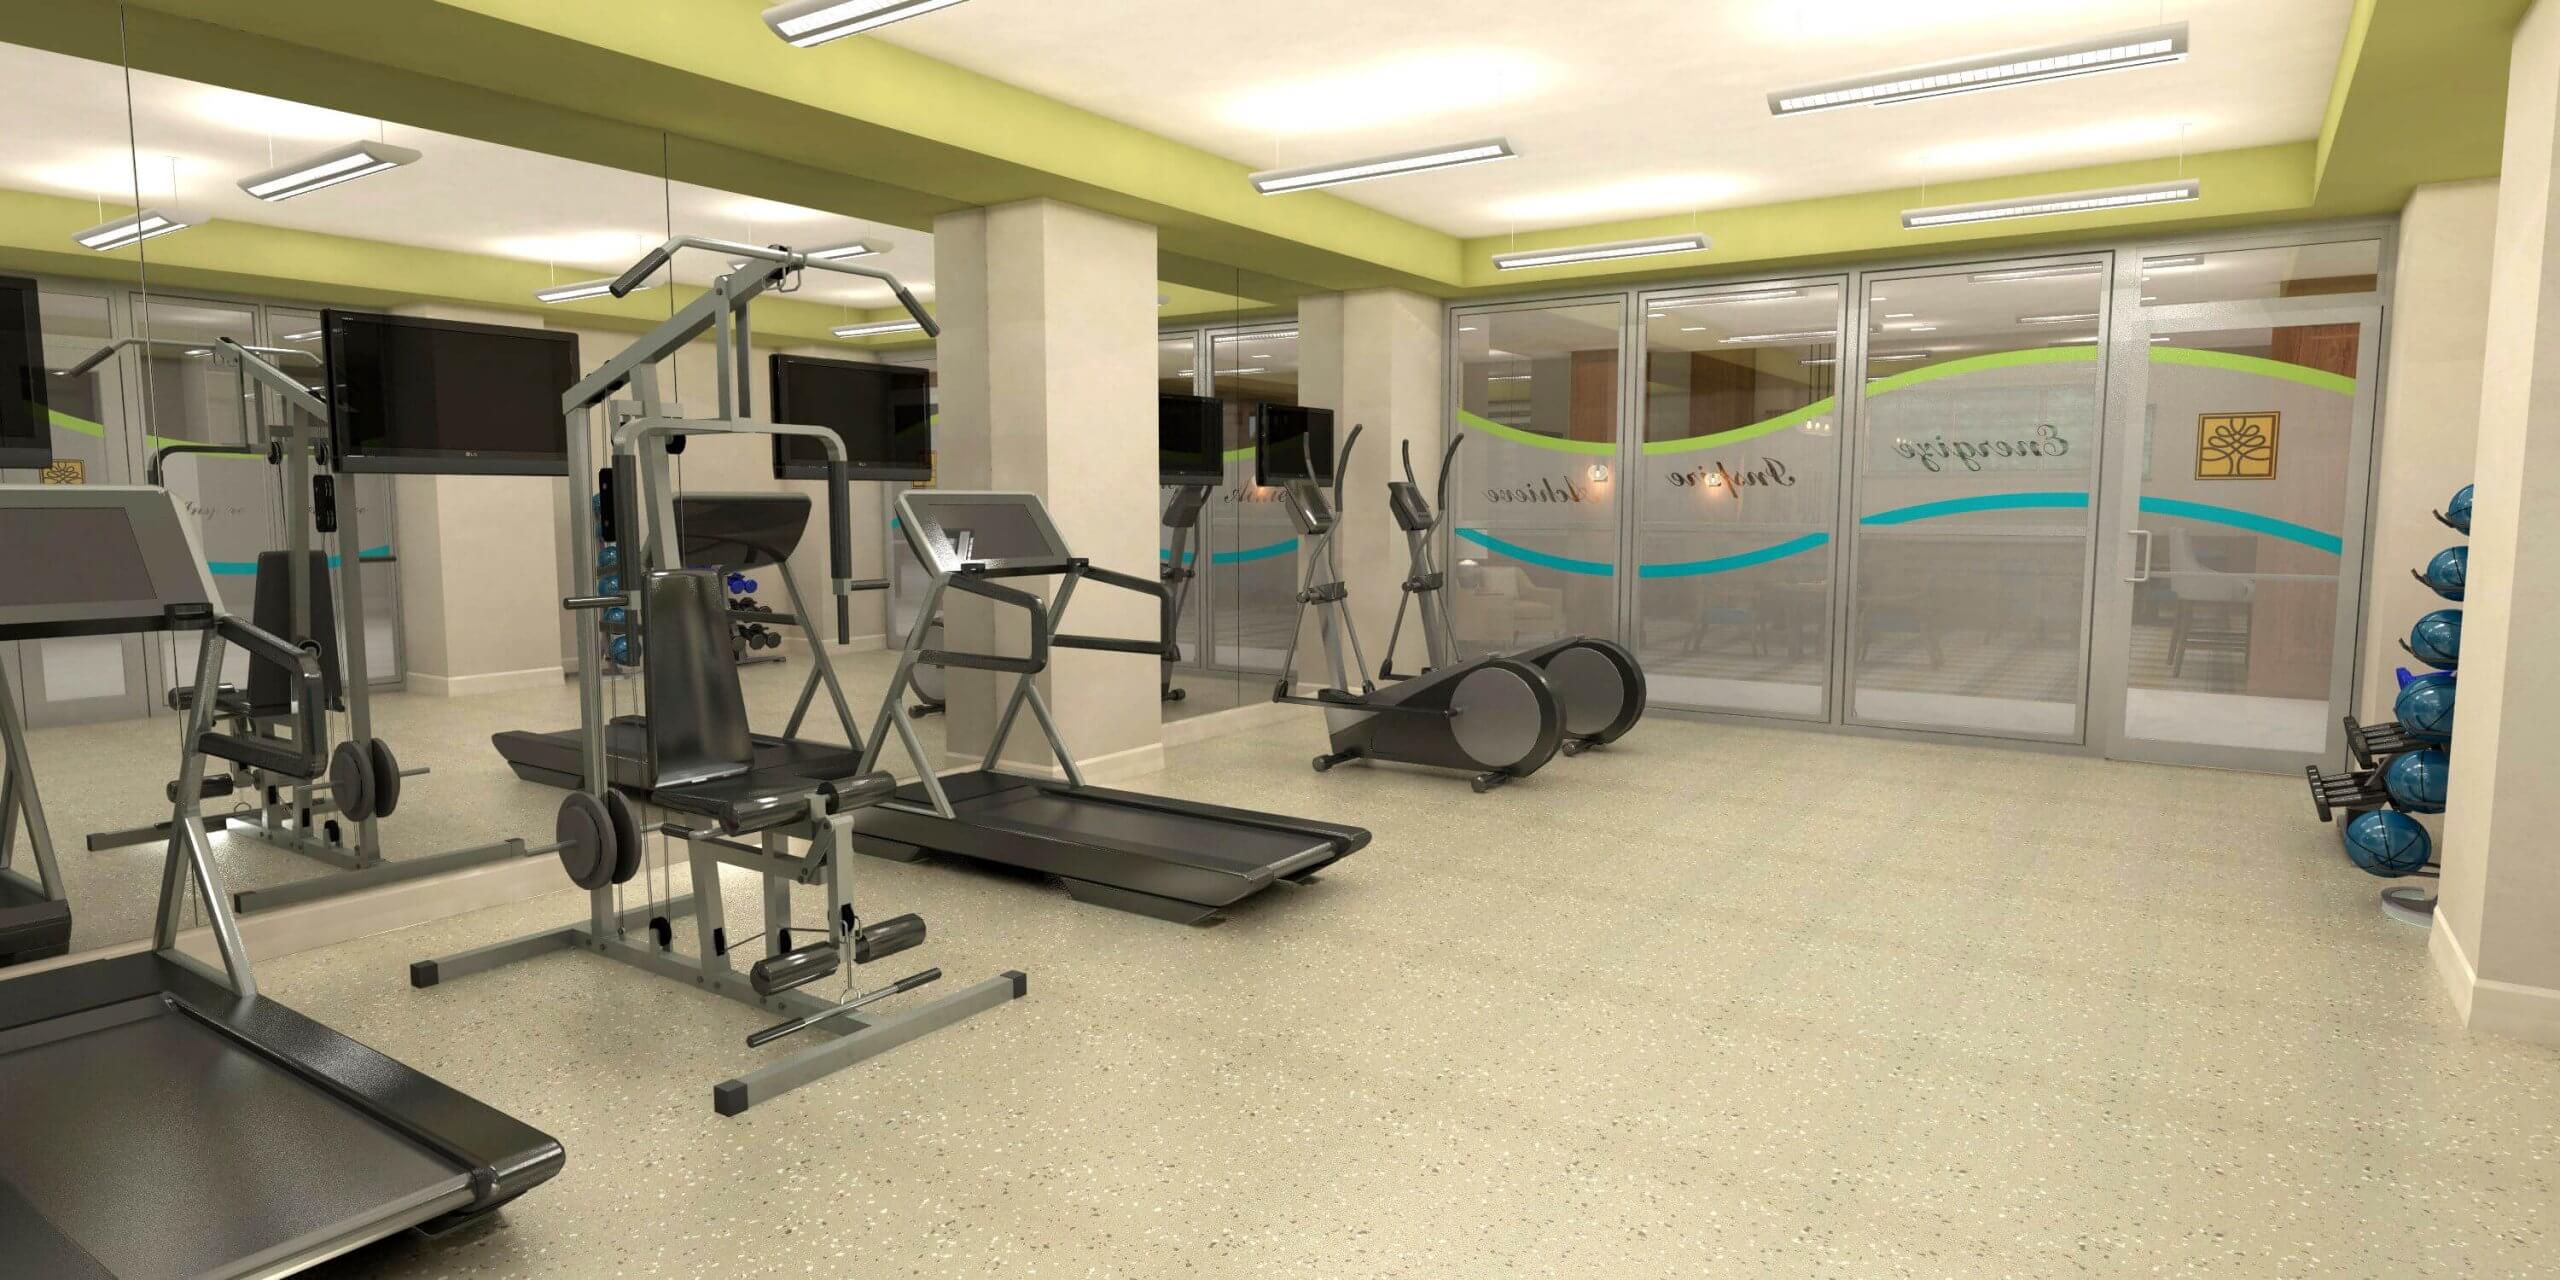 Exercise equipment in brightly lit fitness centre